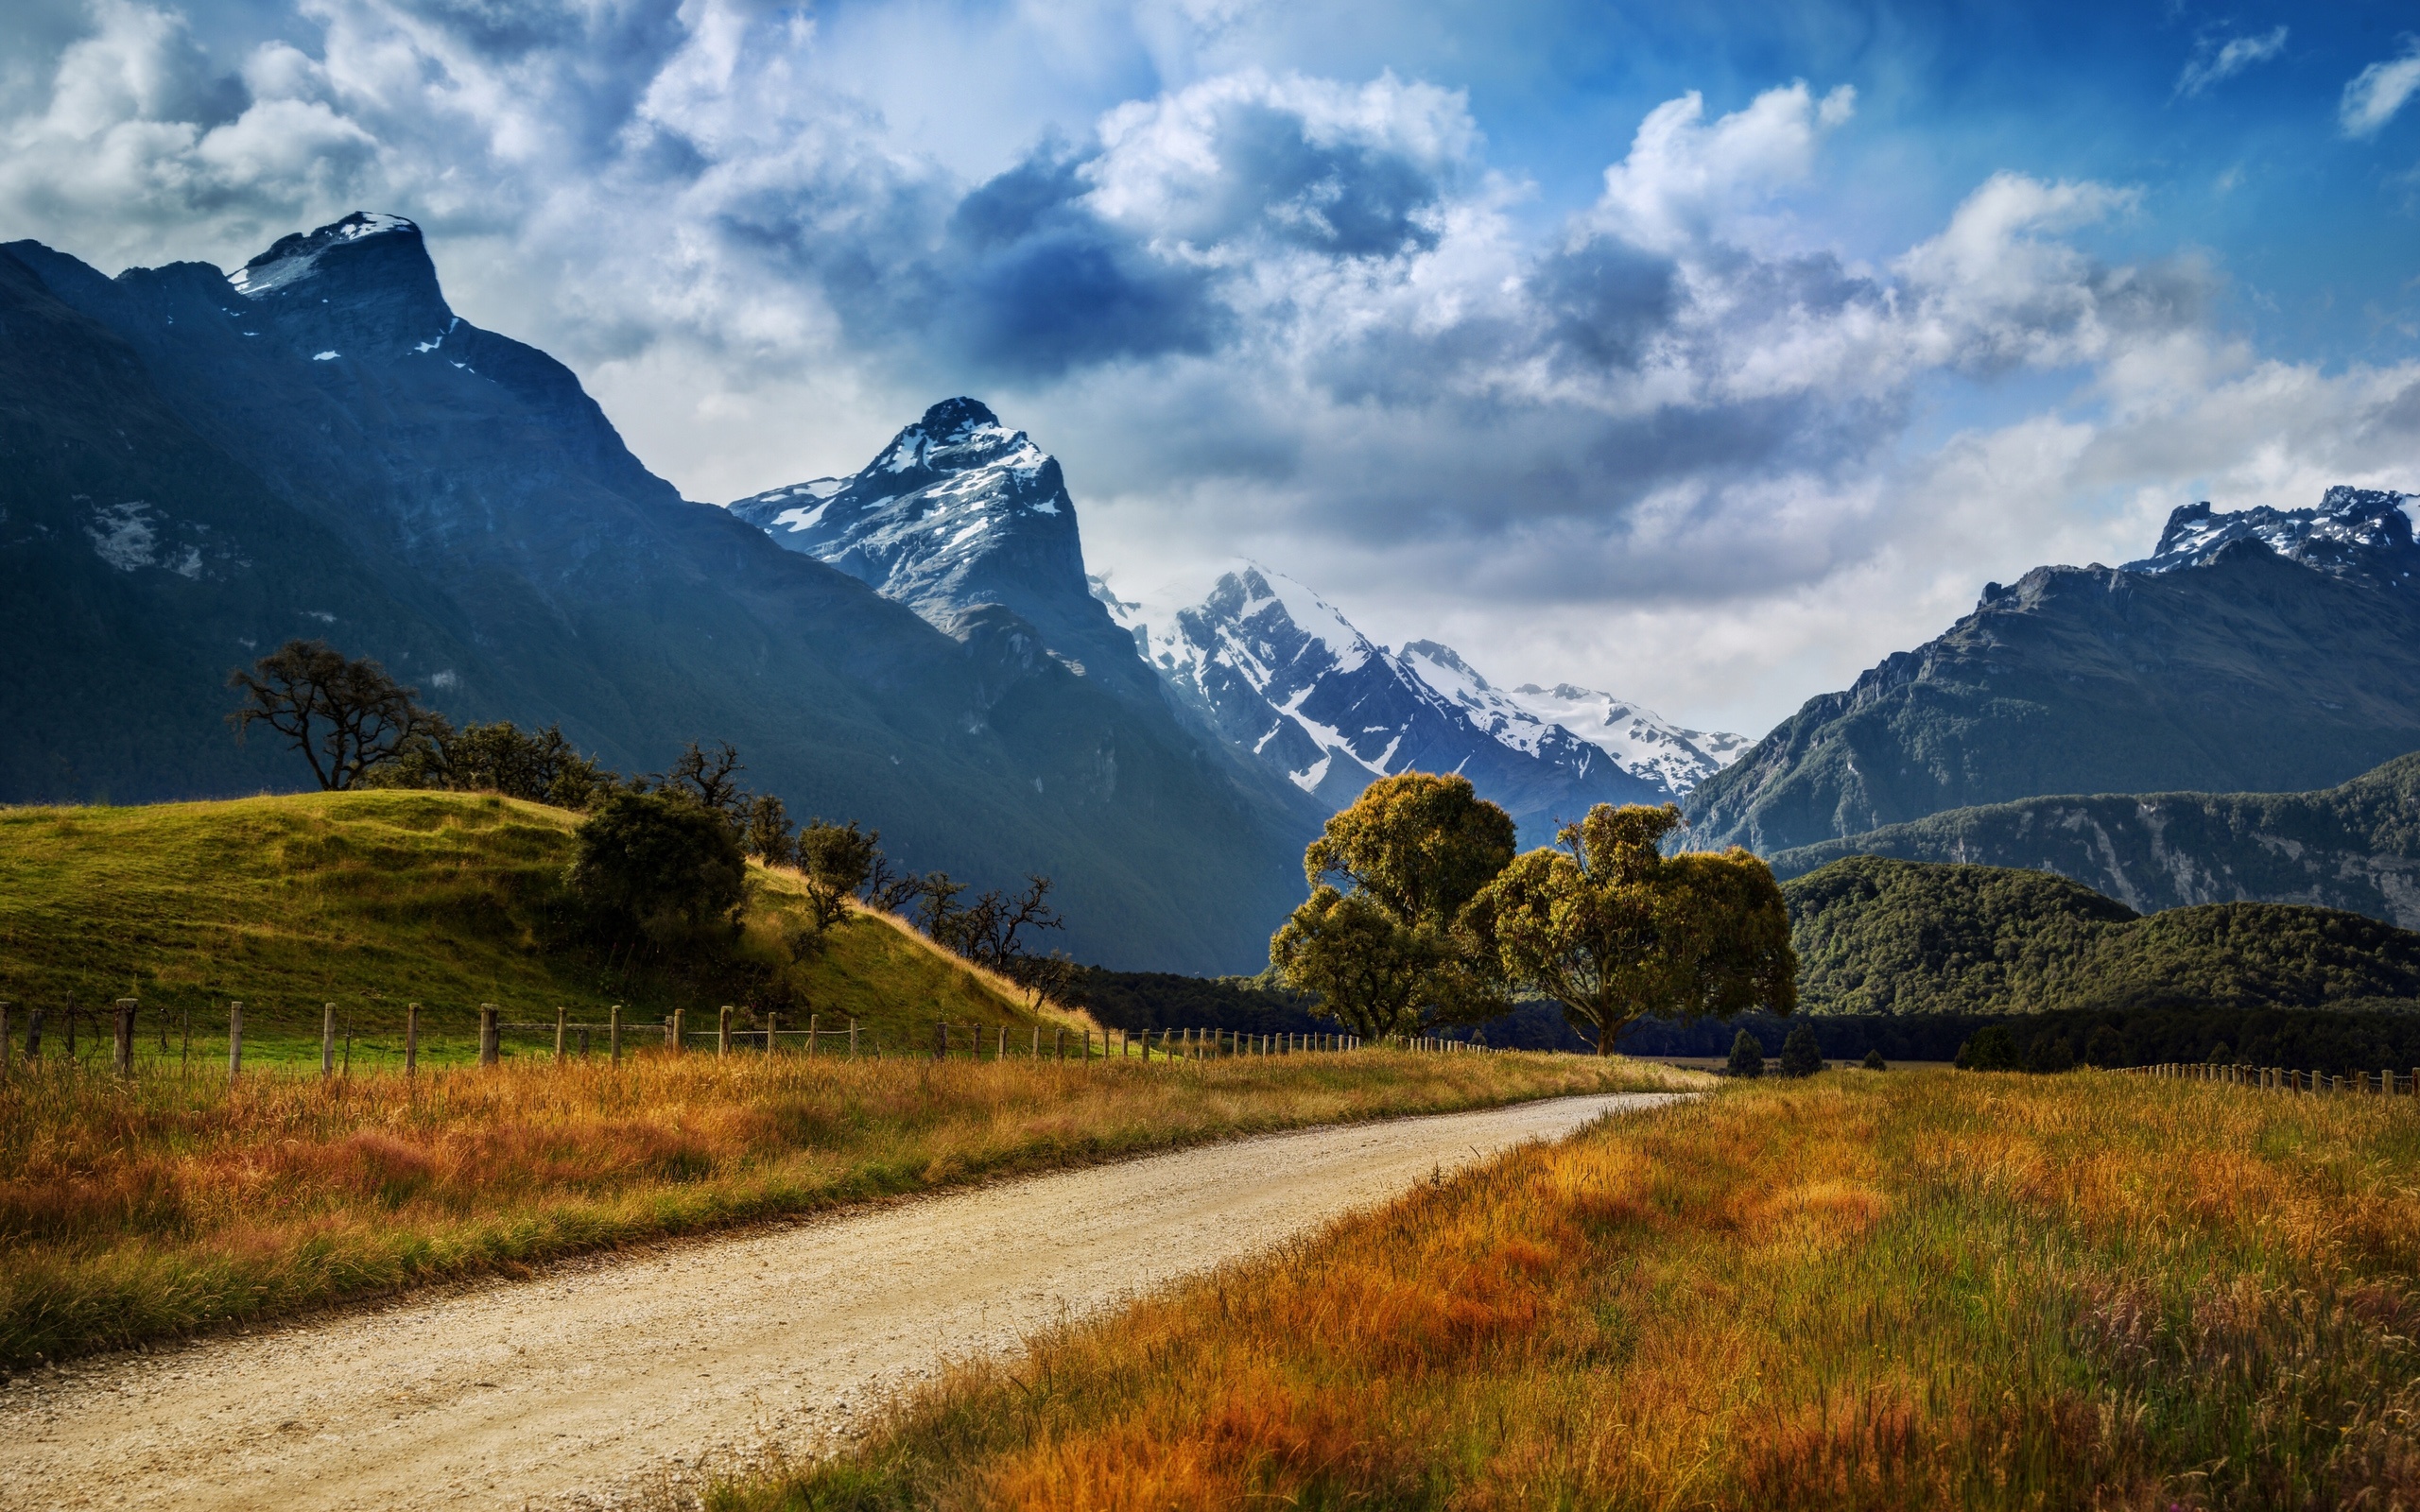 New Zealand nature landscape, mountains, road, trees, grass, clouds